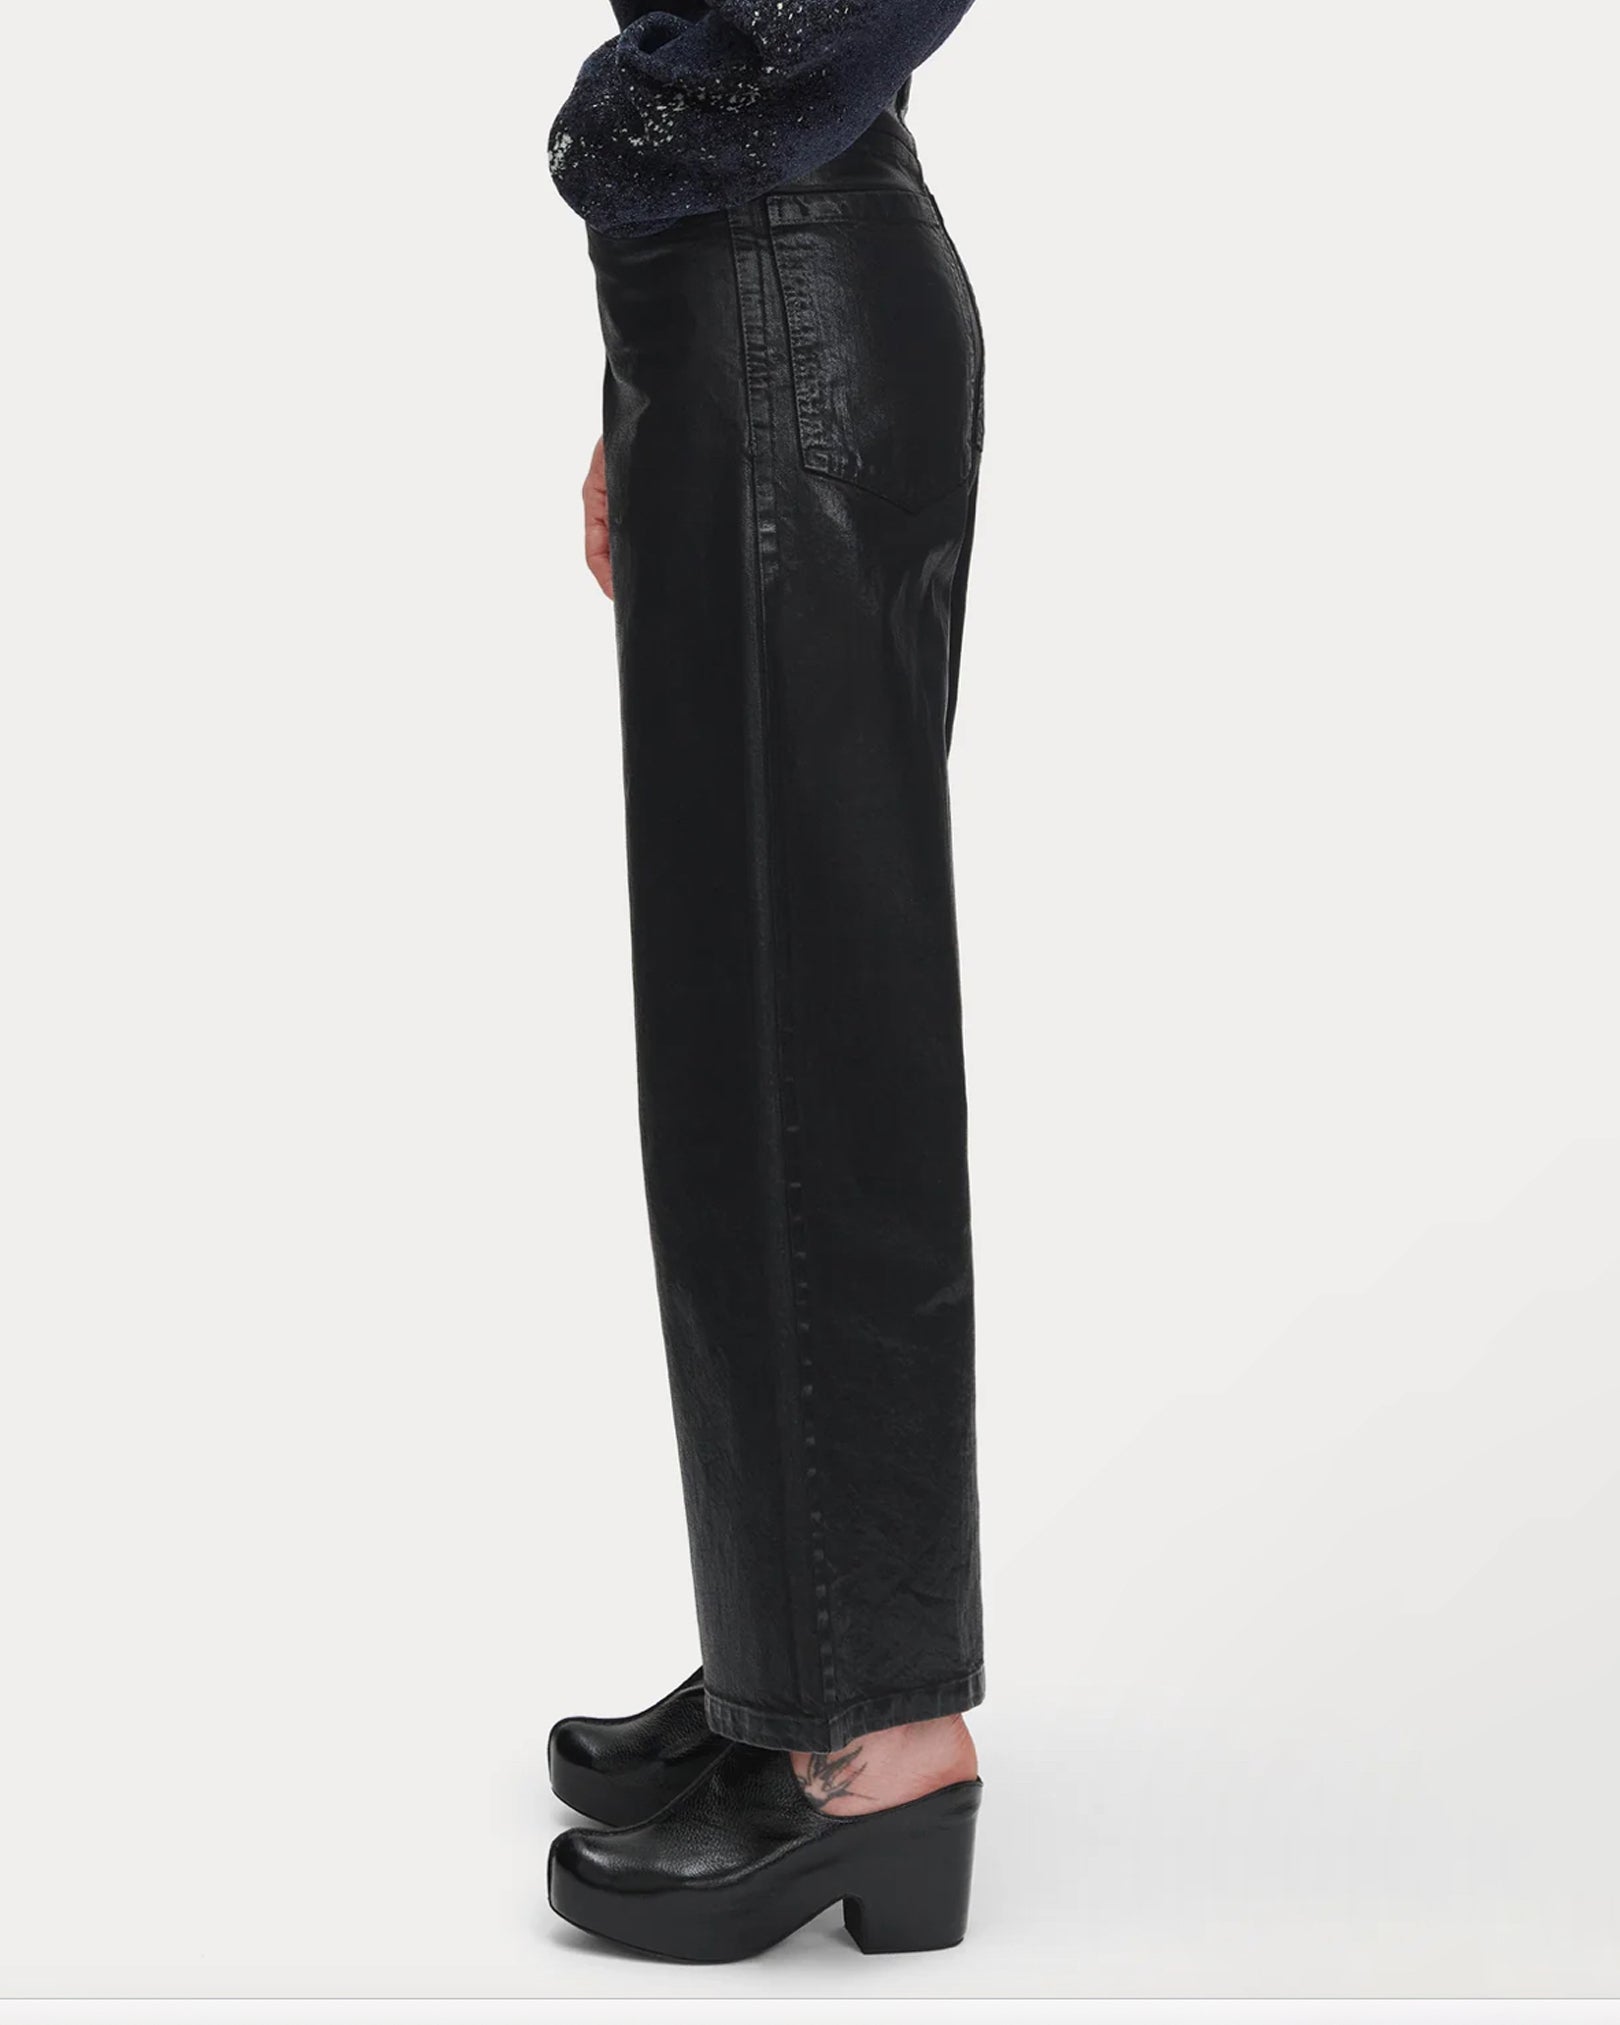 RACHEL COMEY Puerto Pant in Black available at Lahn.shop